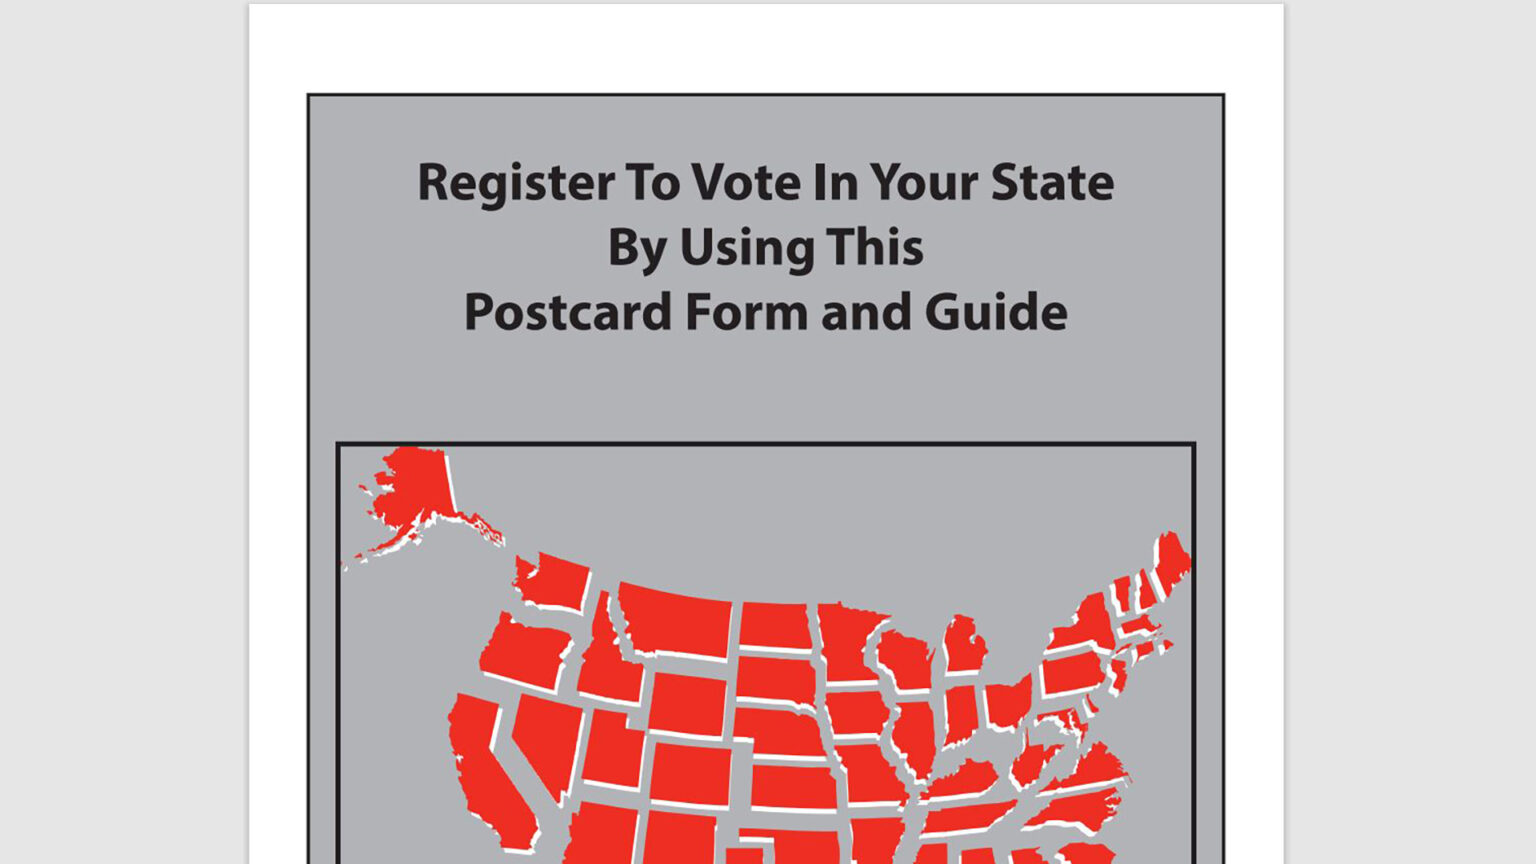 A portion of the title page to the National Mail Voter Registration Form features the text Register To Vote In Your State By Using This Postcard Form and Guide and a map showing the disconnected outlines of U.S. states.